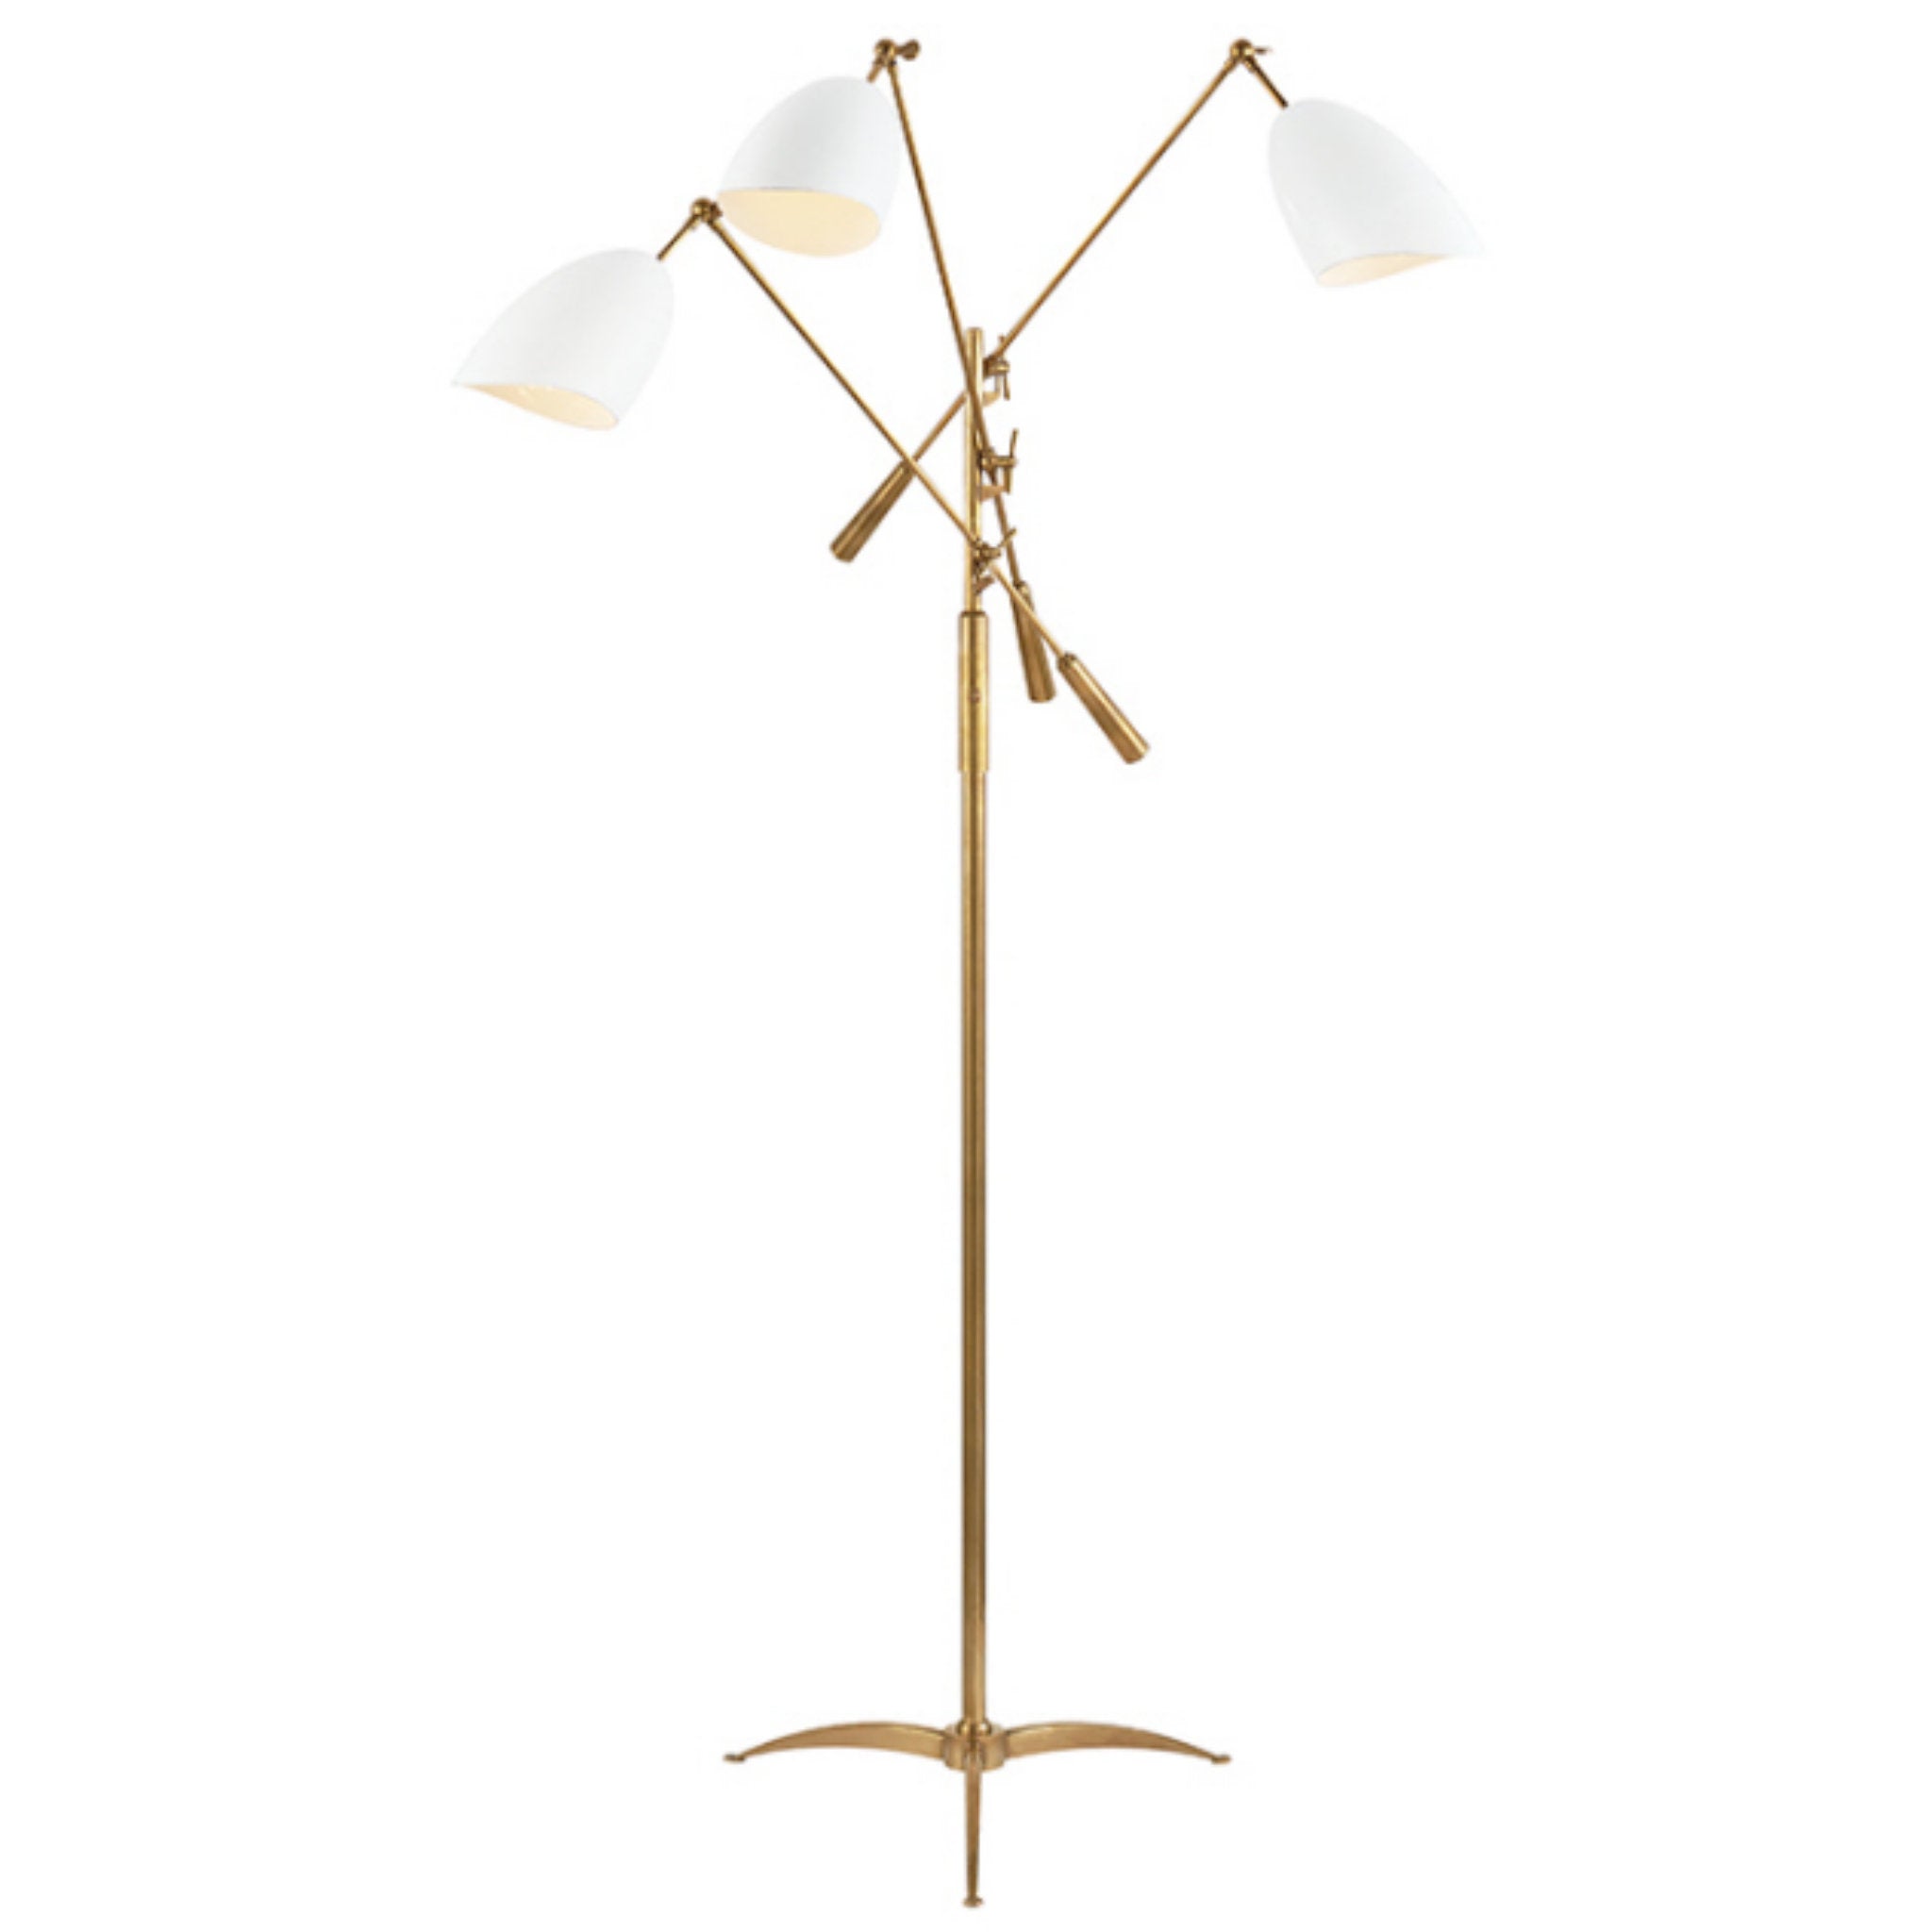 AERIN Sommerard Triple Arm Floor Lamp in Hand-Rubbed Antique Brass with White